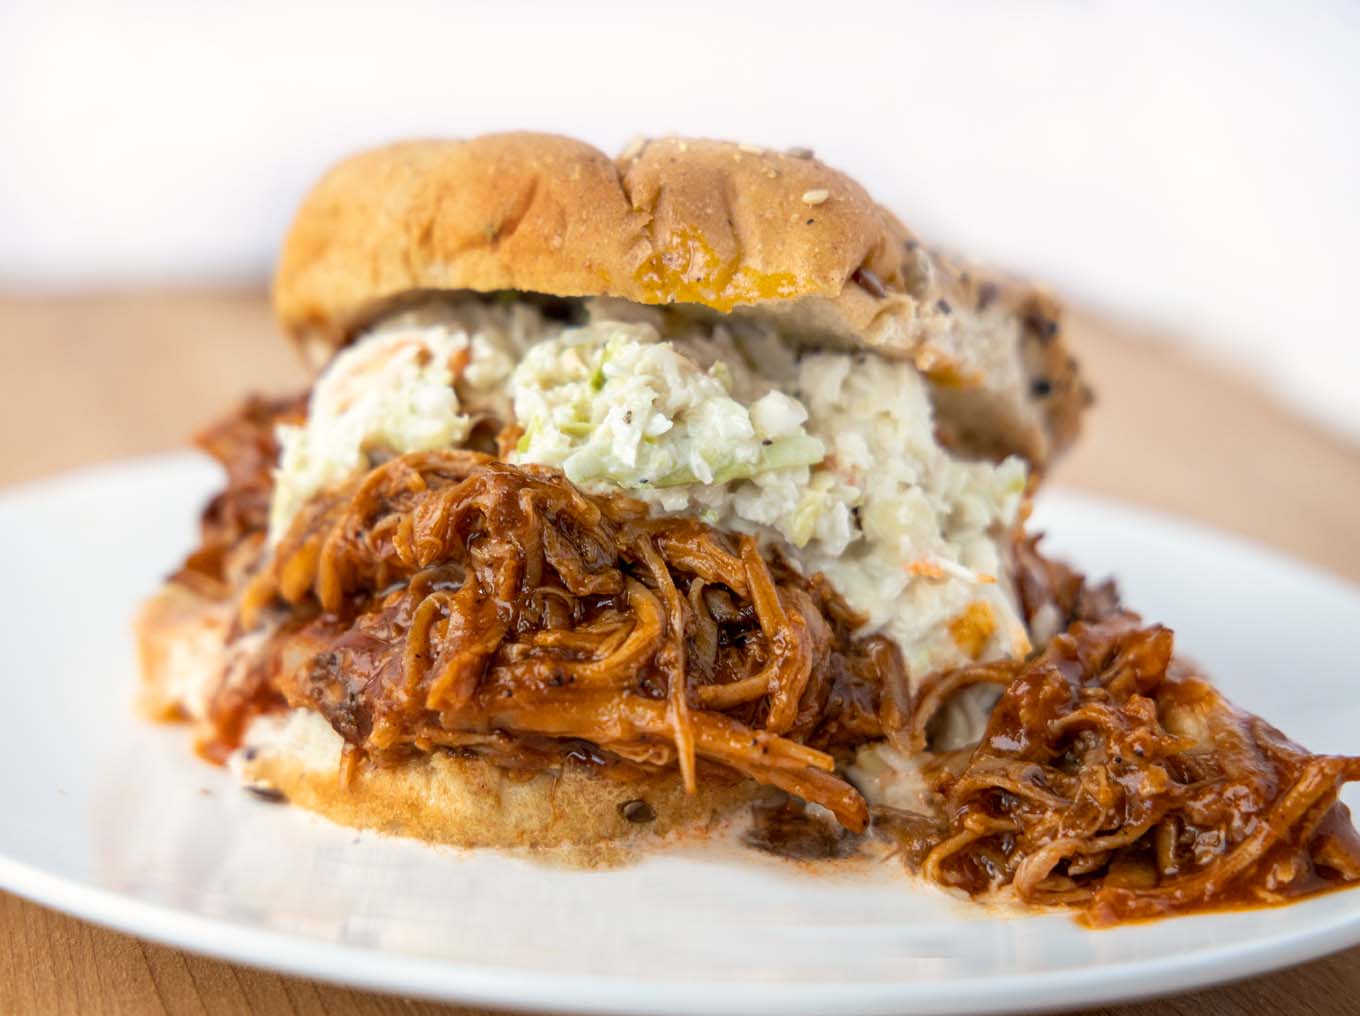 Pulled Pork 190 vs 205: Finding the Perfect Pulled Pork Temperature